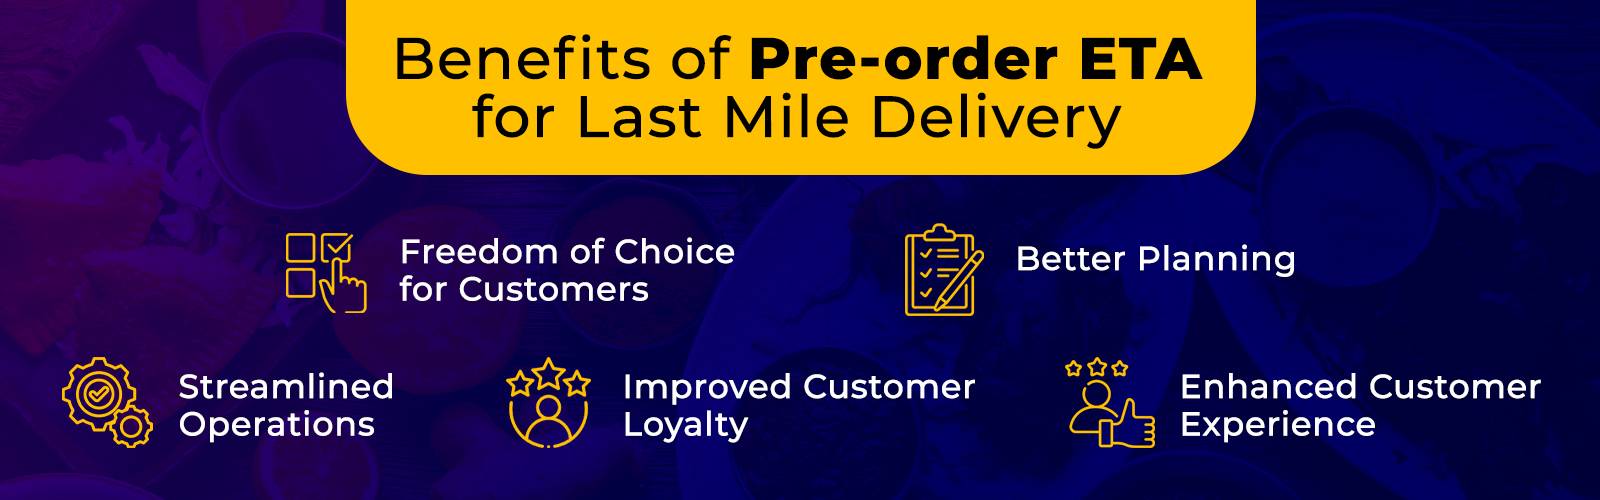 Benefits of Pre Order ETA for Last Mile Delivery